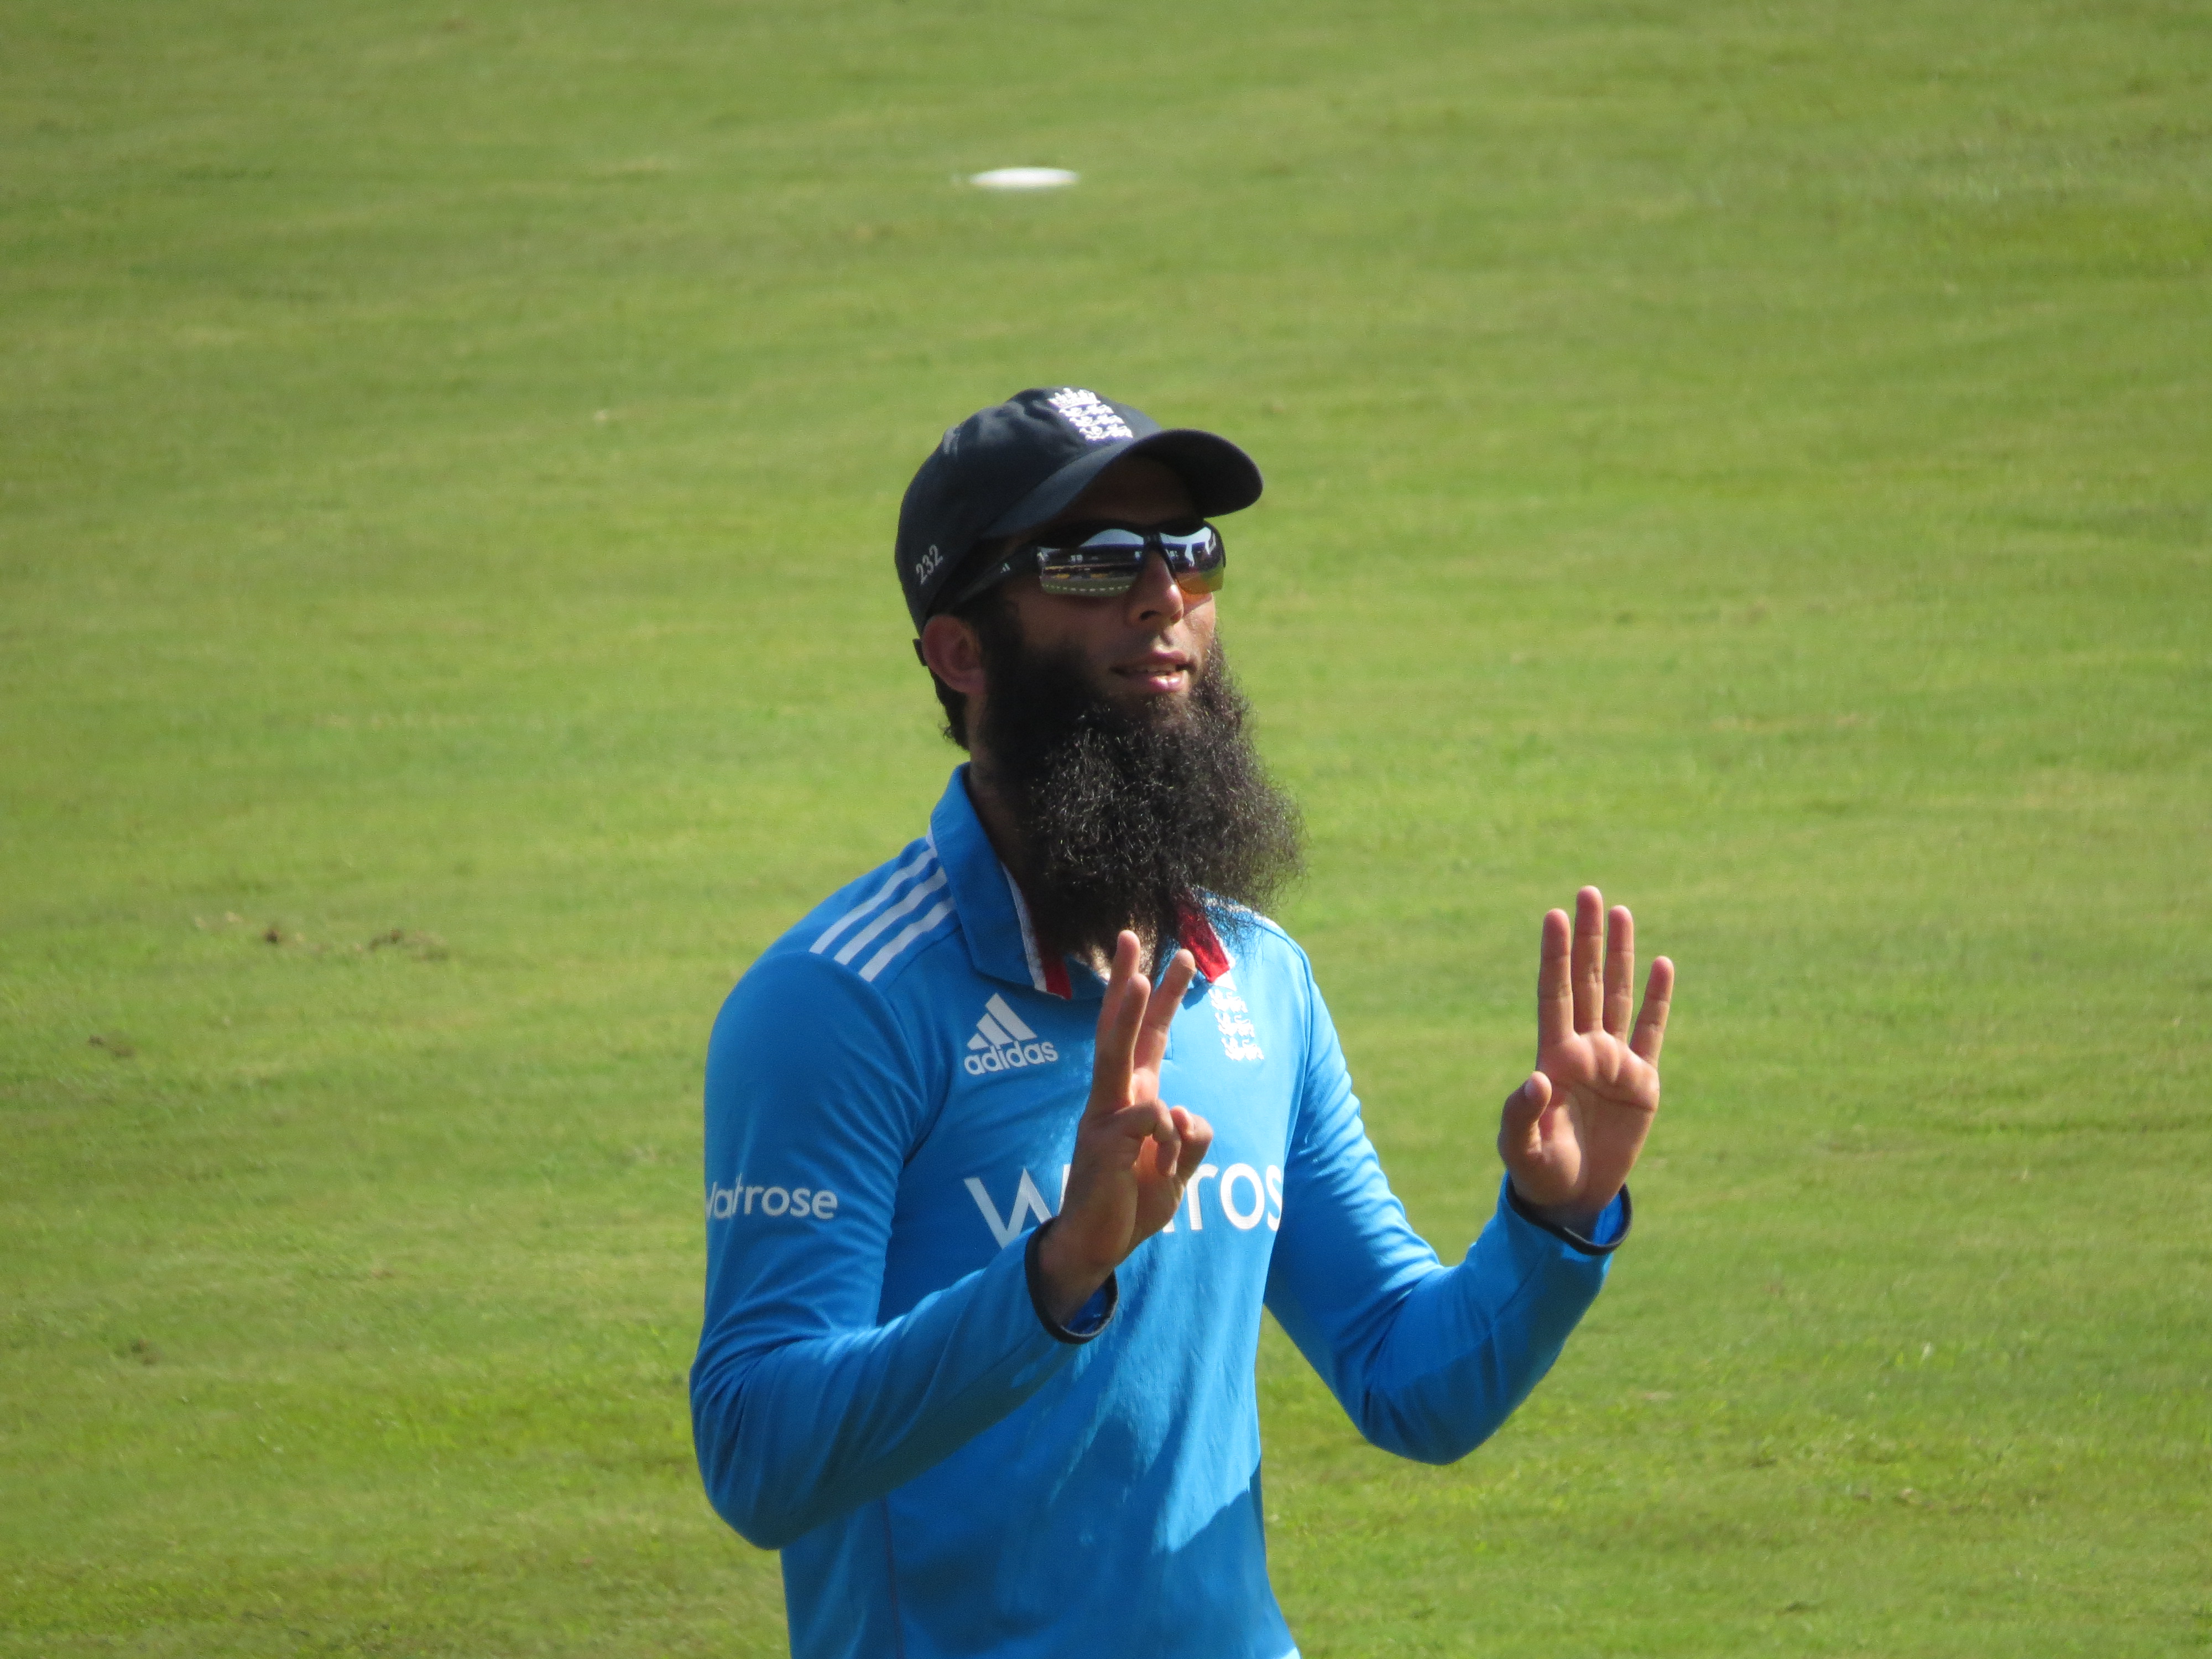 Moeen Ali back in England bubble after clearing COVID test
